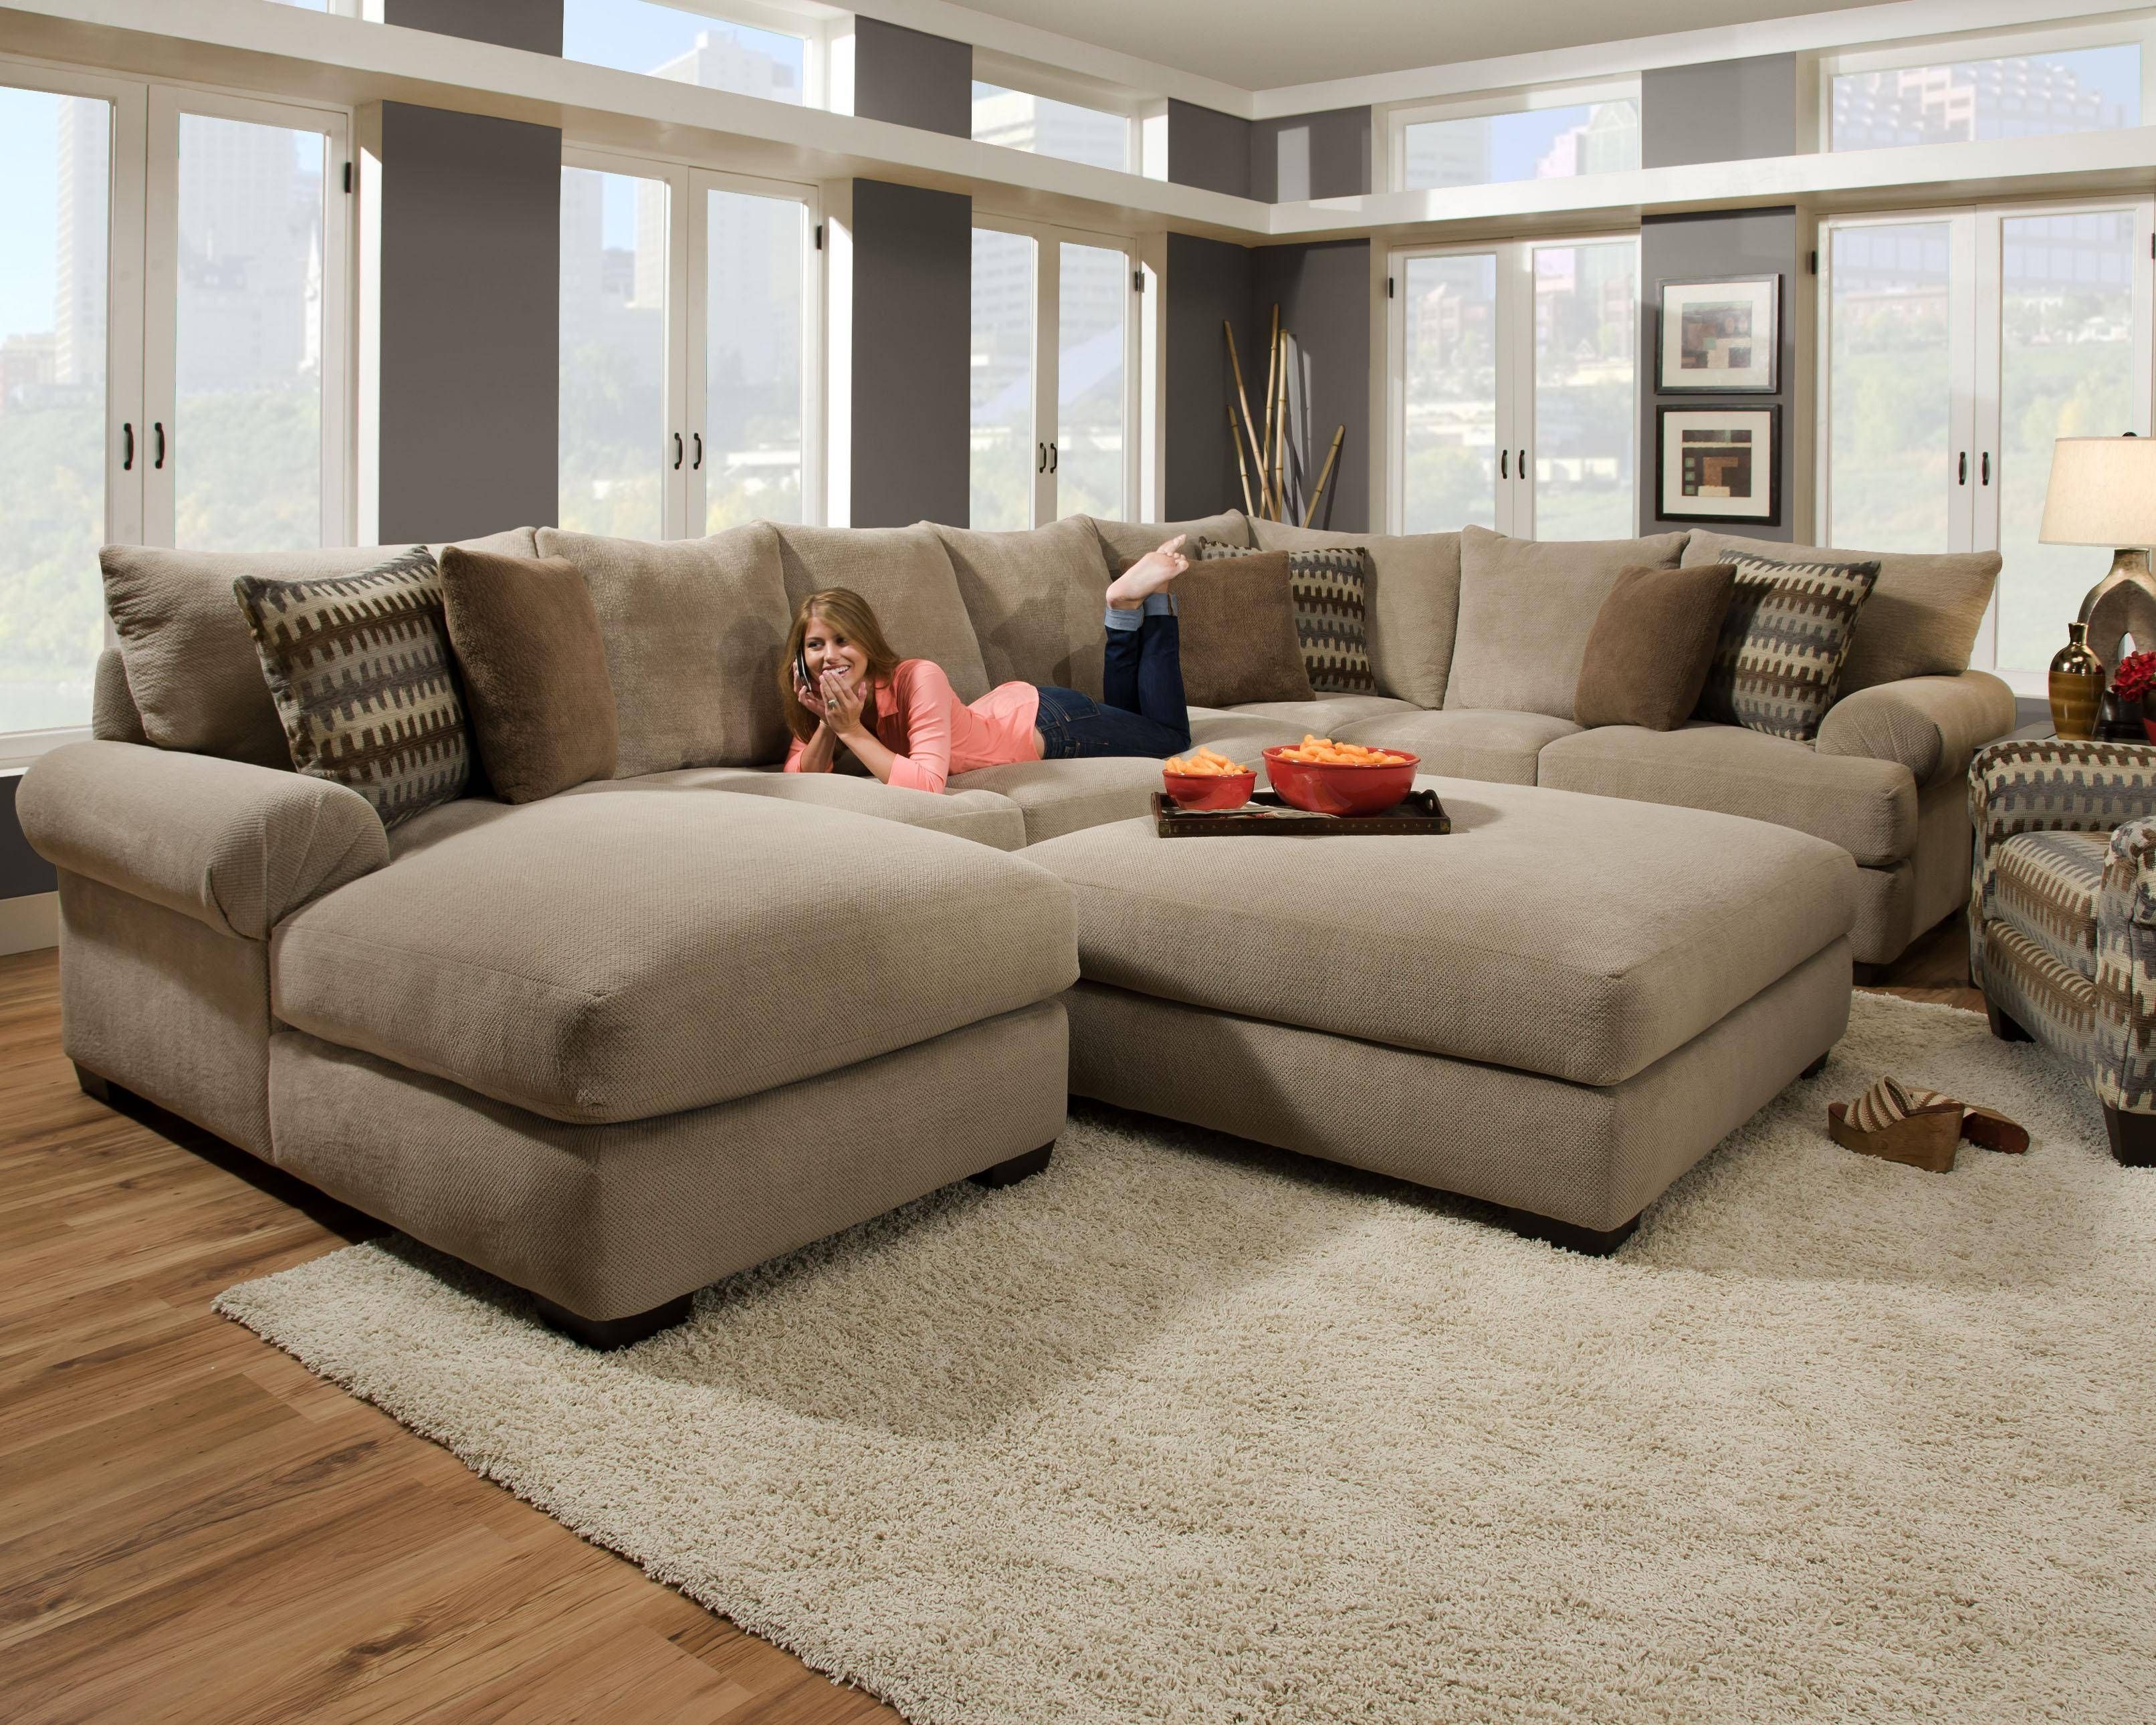 Furniture: Interesting Living Room Interior Using Large Sectional Inside Oversized Sectional Sofa (View 9 of 30)